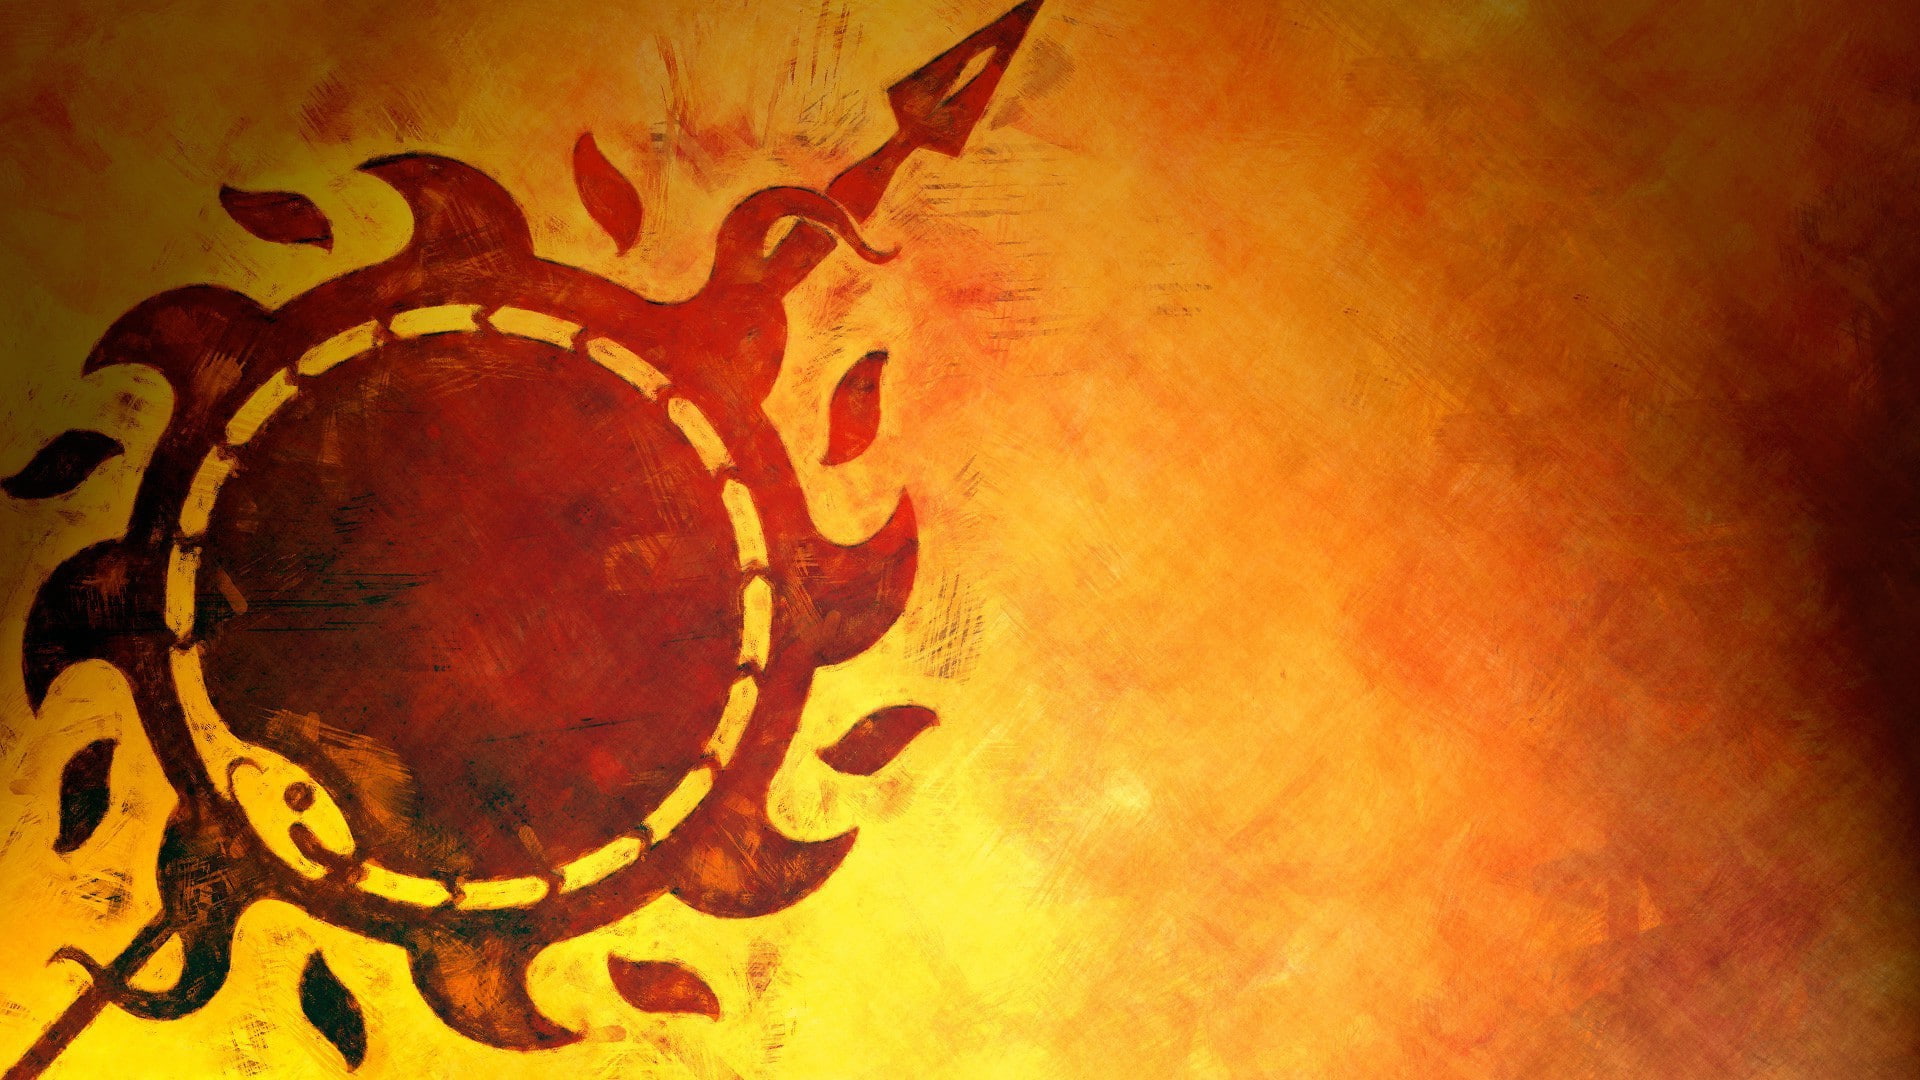 game of thrones sigils house martell, backgrounds, no people